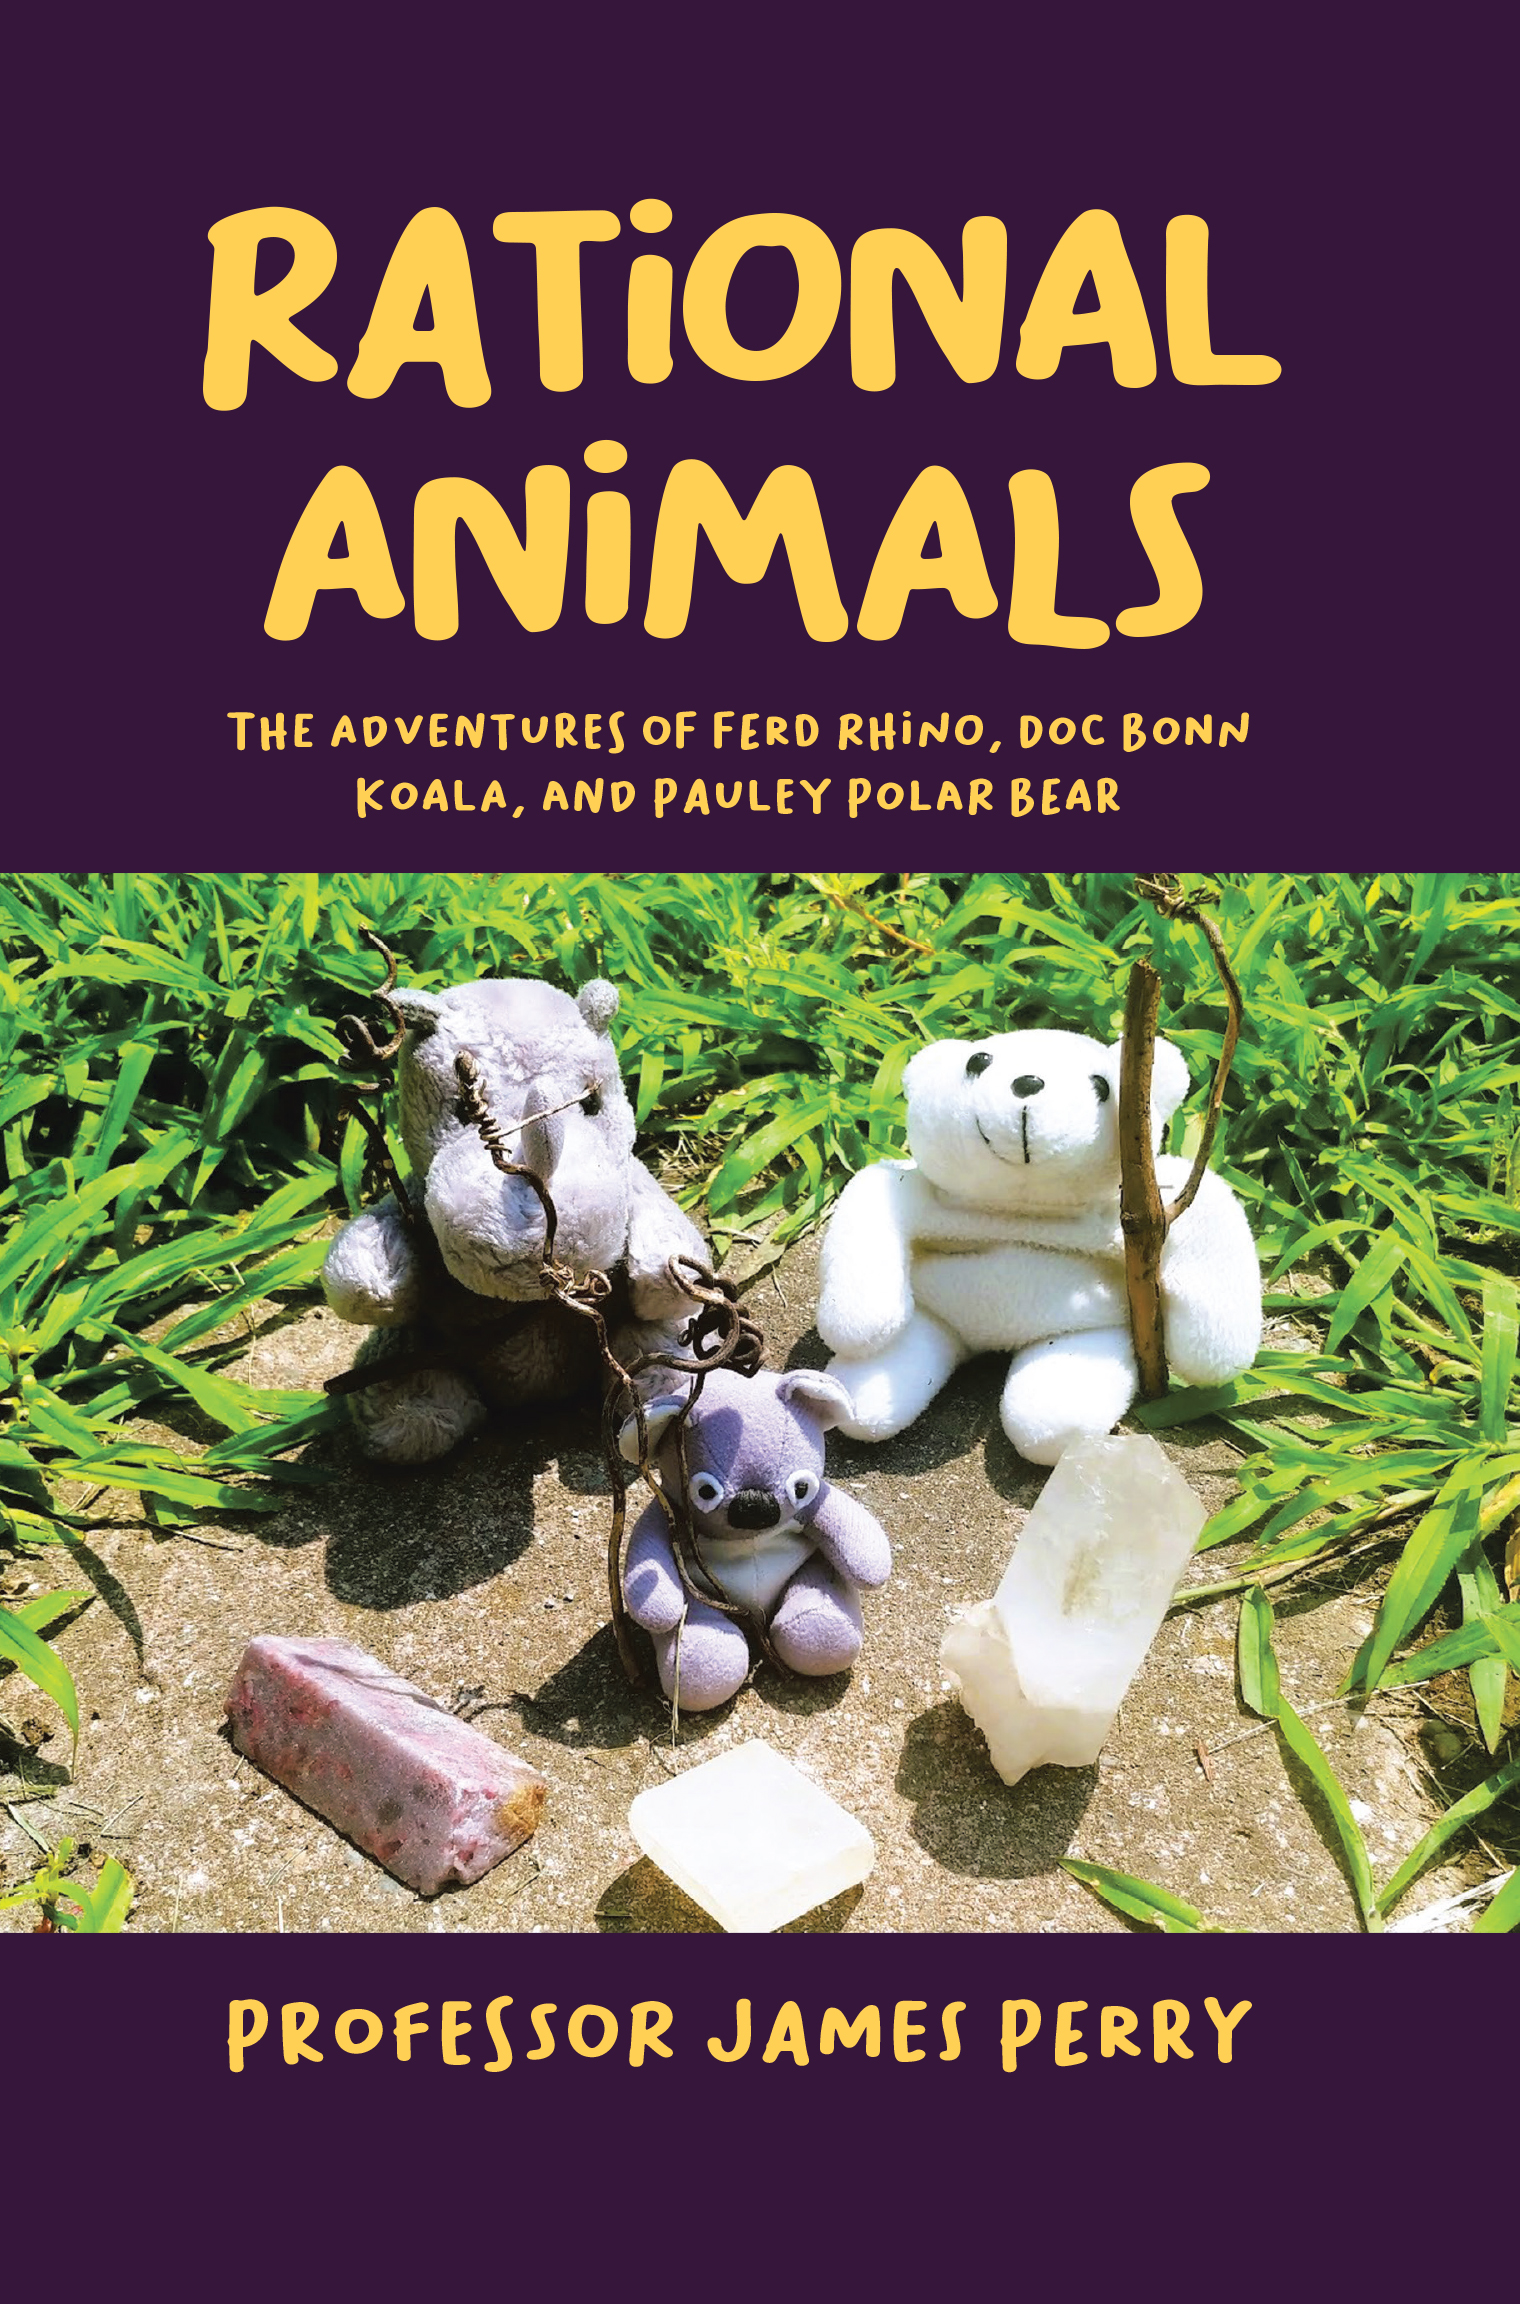 Author Professor James Perry’s New Book, "Rational Animals," Explores the Interconnectedness of All Beings and the Importance of Conservation and Self-Reflection